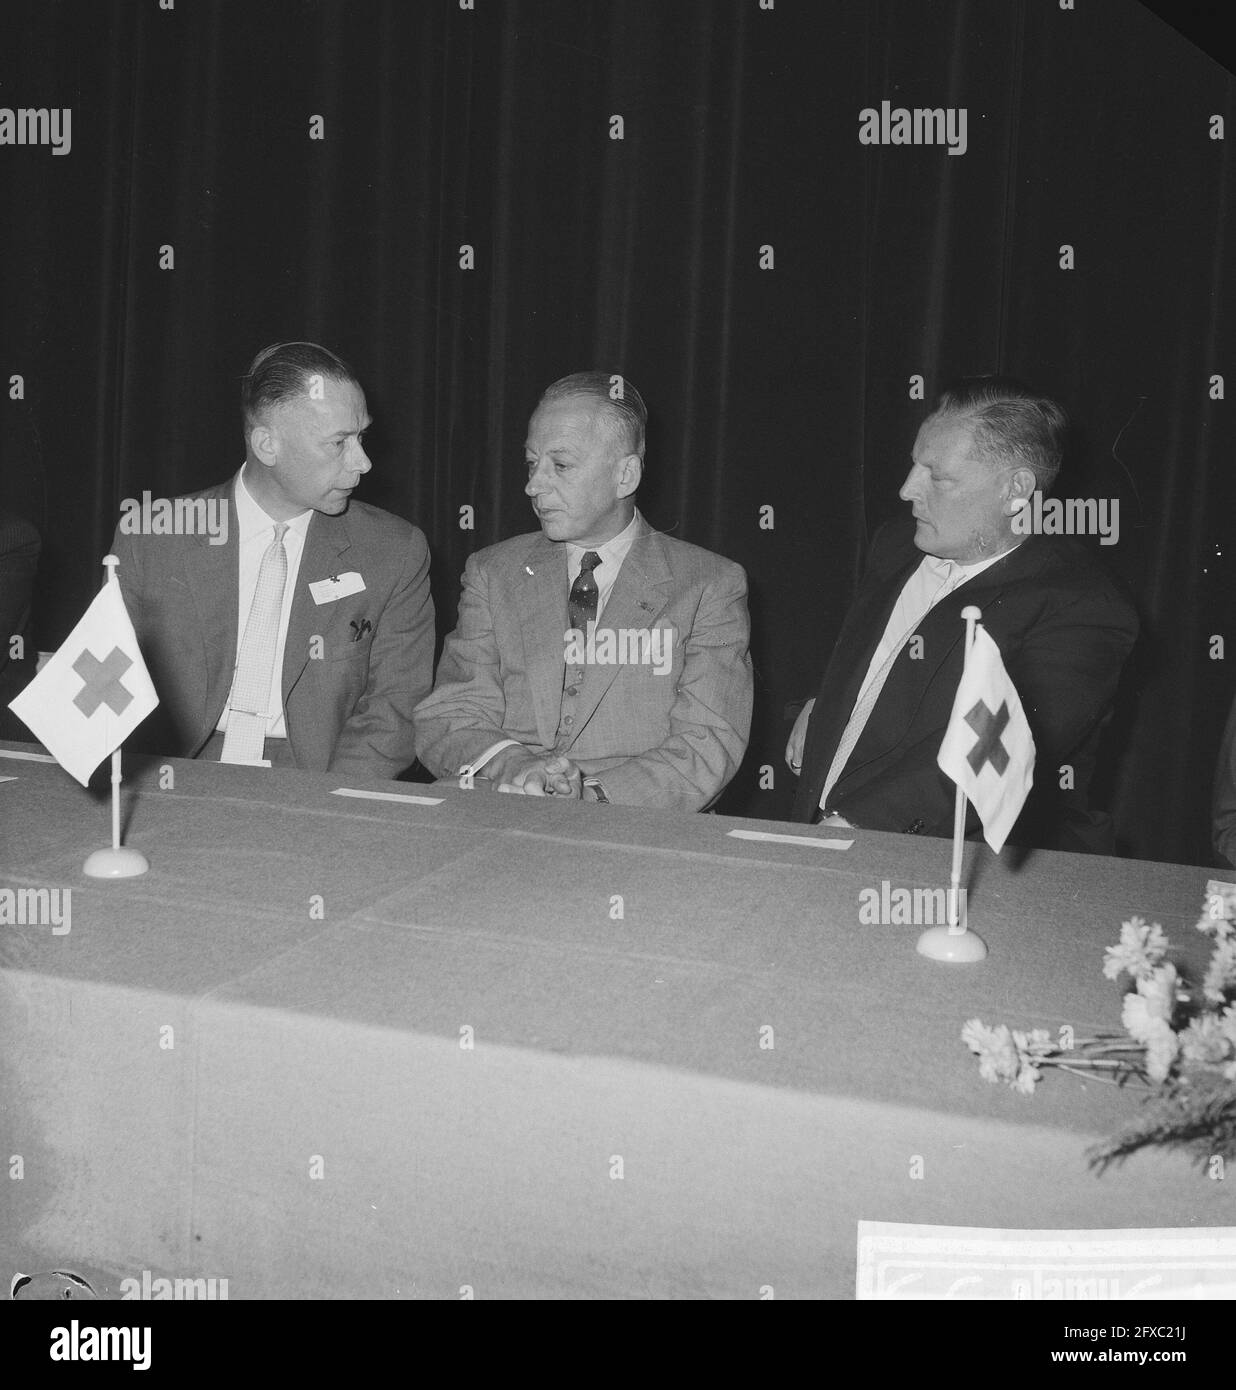 Jubilee 50 years Green Cross in Utrecht. Mr. De Ranitz, Dr. Navis and Mr. van Gelder, October 30, 1961, anniversaries, The Netherlands, 20th century press agency photo, news to remember, documentary, historic photography 1945-1990, visual stories, human history of the Twentieth Century, capturing moments in time Stock Photo